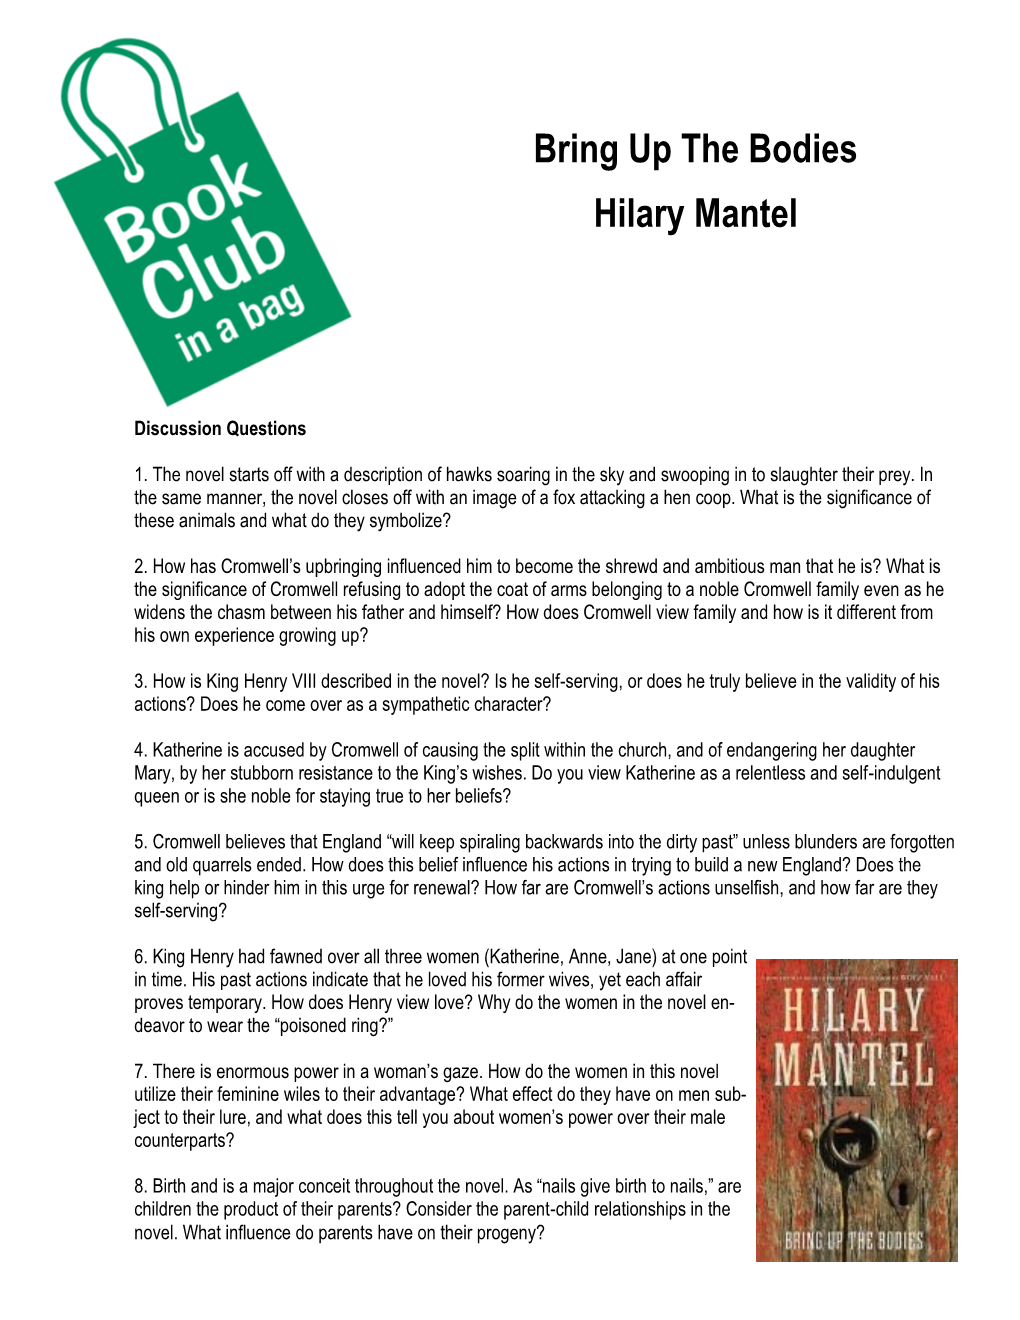 Bring up the Bodies Hilary Mantel